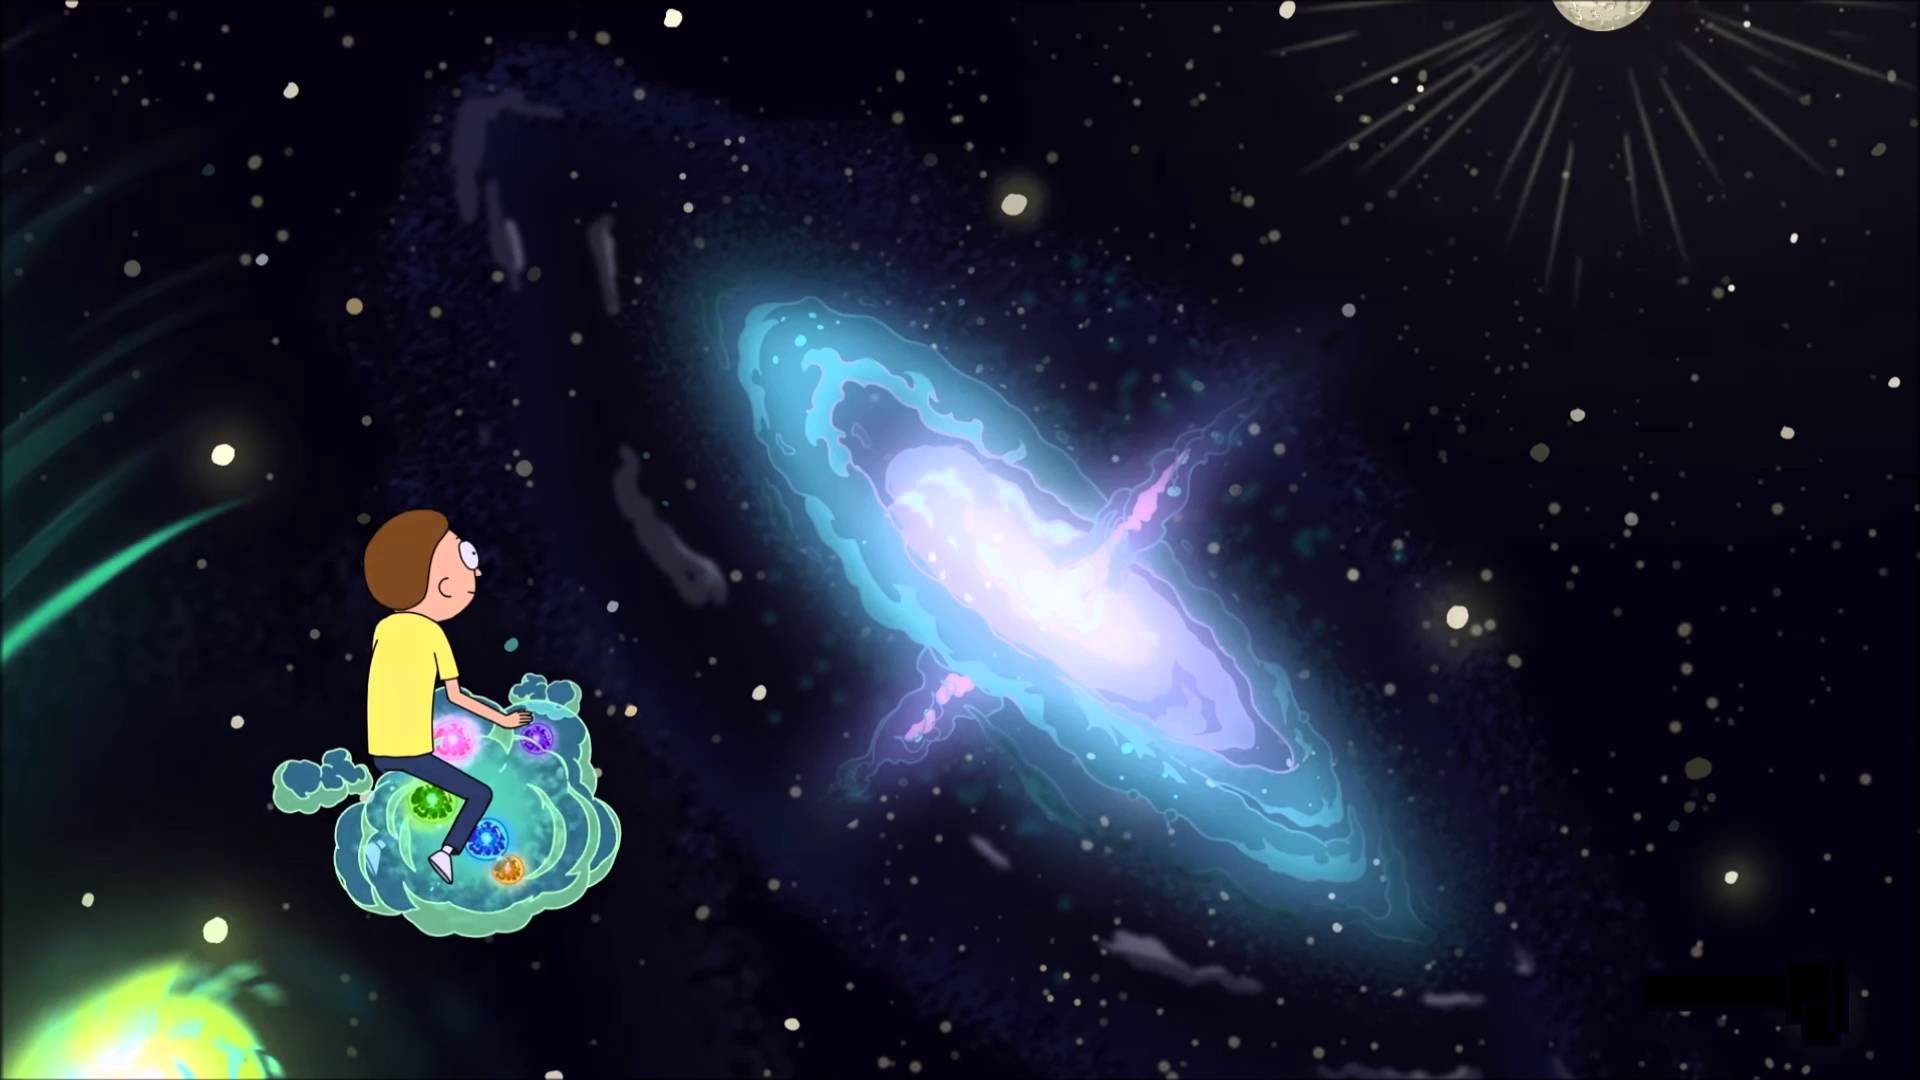 Cartoon Network Rick and Morty Desktop Backgrounds HD with image resolution 1920x1080 pixel. You can use this wallpaper as background for your desktop Computer Screensavers, Android or iPhone smartphones